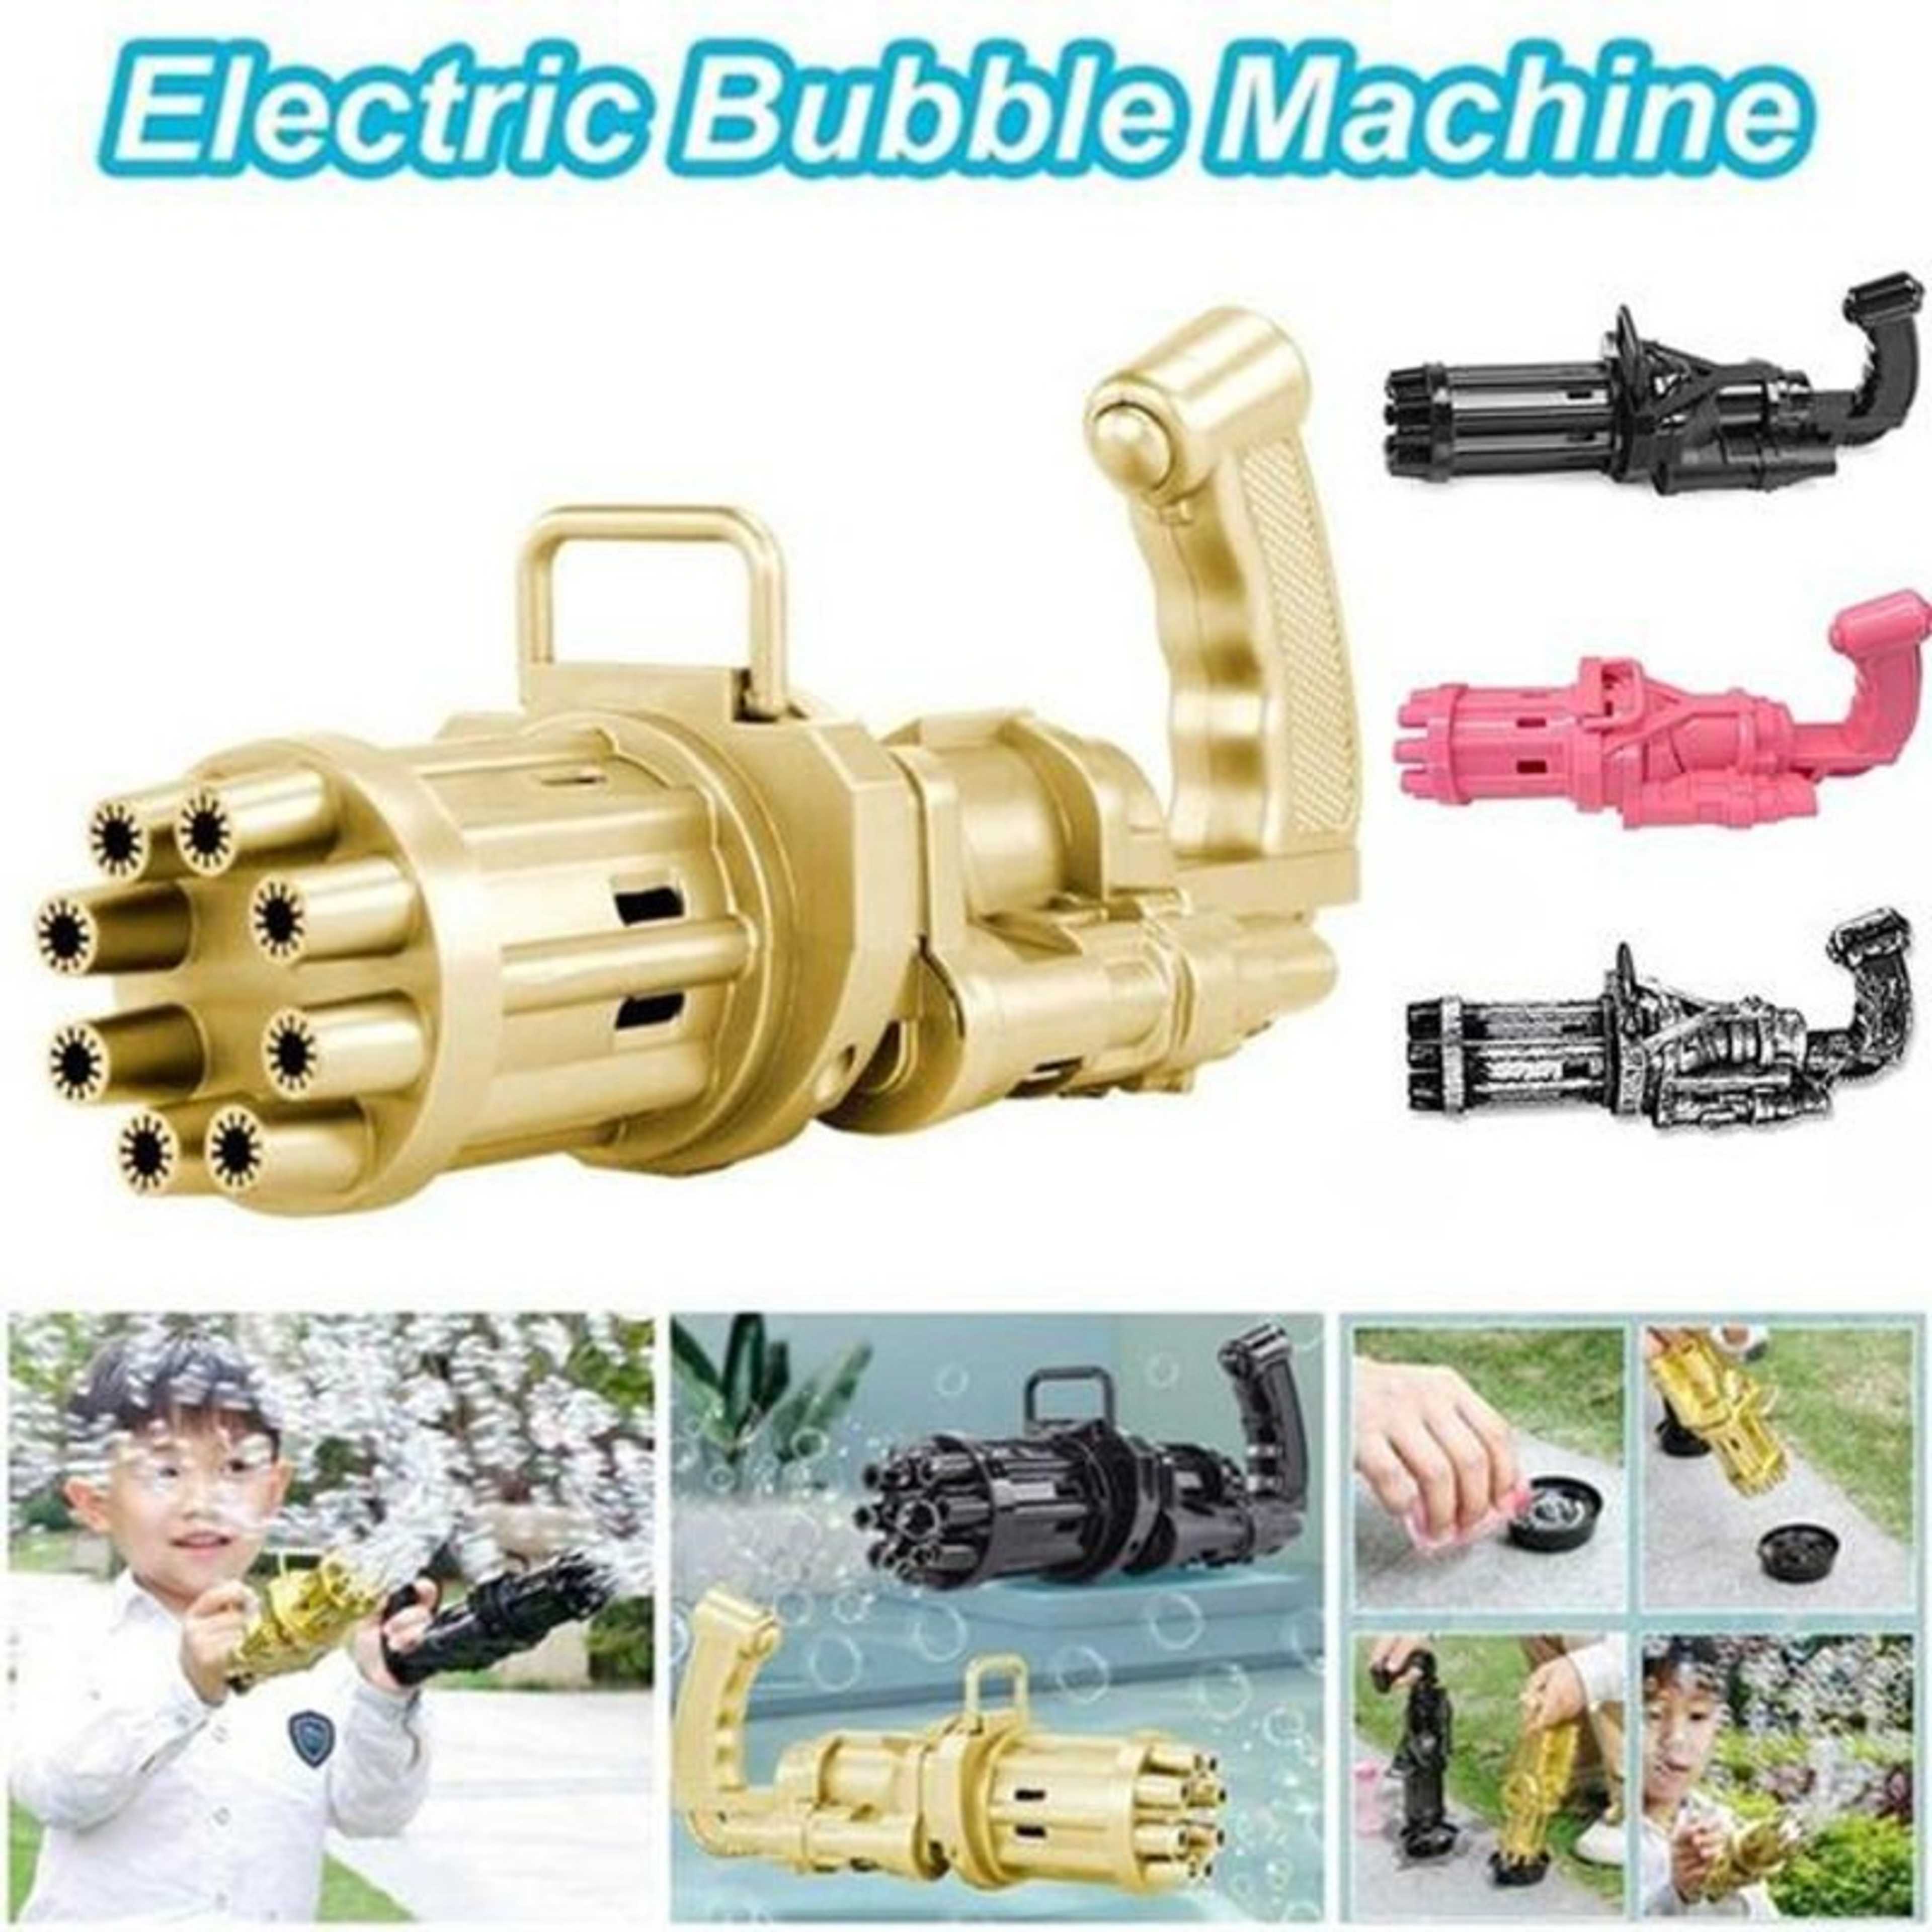 8-Hole Bubble Gun Machine - Massive Bubble Gattler Toy gun With Bubble liquid for Kids - Automatic Electric Bubble Maker Machine glue Water Gun toy - Assorted Random Color /  Swimming  Pool & Water Toys & Games Toys / Water Blaster & Soakers